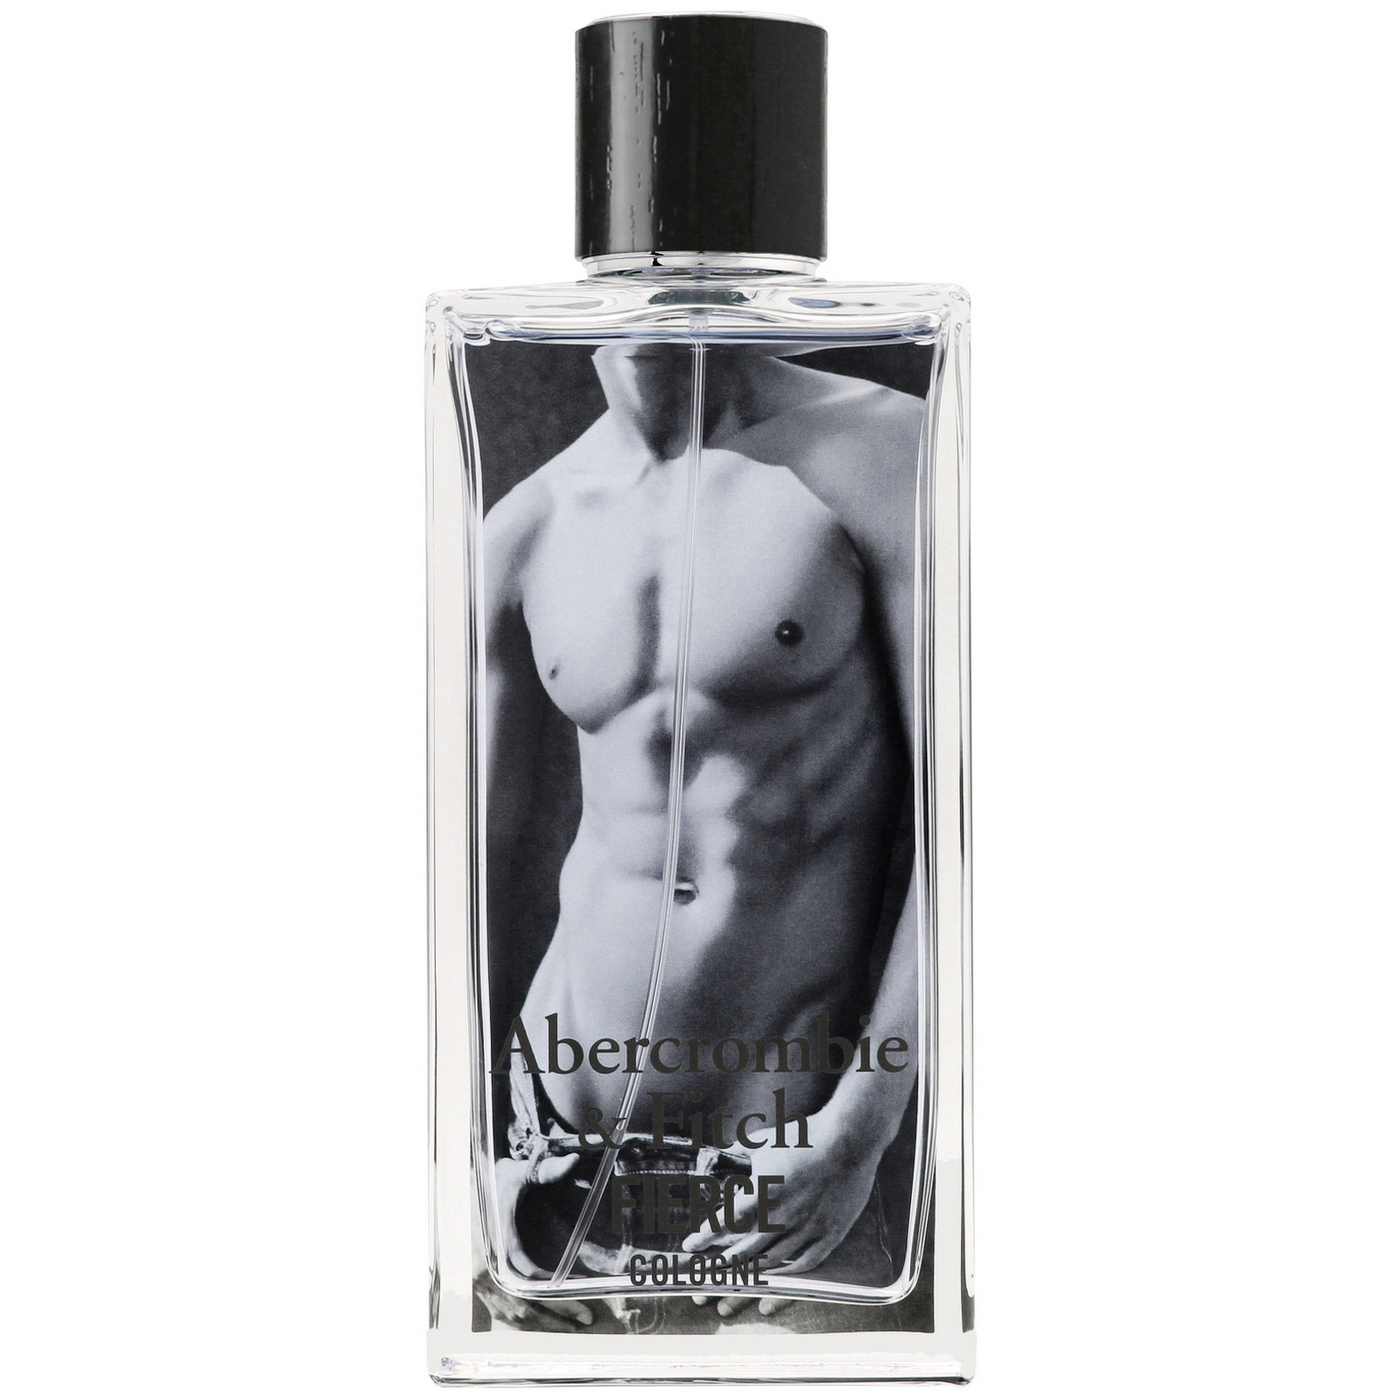 Abercrombie fitch fierce. Abercrombie & Fitch Fierce 100. Abercrombie & Fitch Fierce Cologne 100m. Abercrombie & Fitch Fierce for men EDC 100 ml. Abercrombie & Fitch Fierce Cologne одеколон 100 мл.